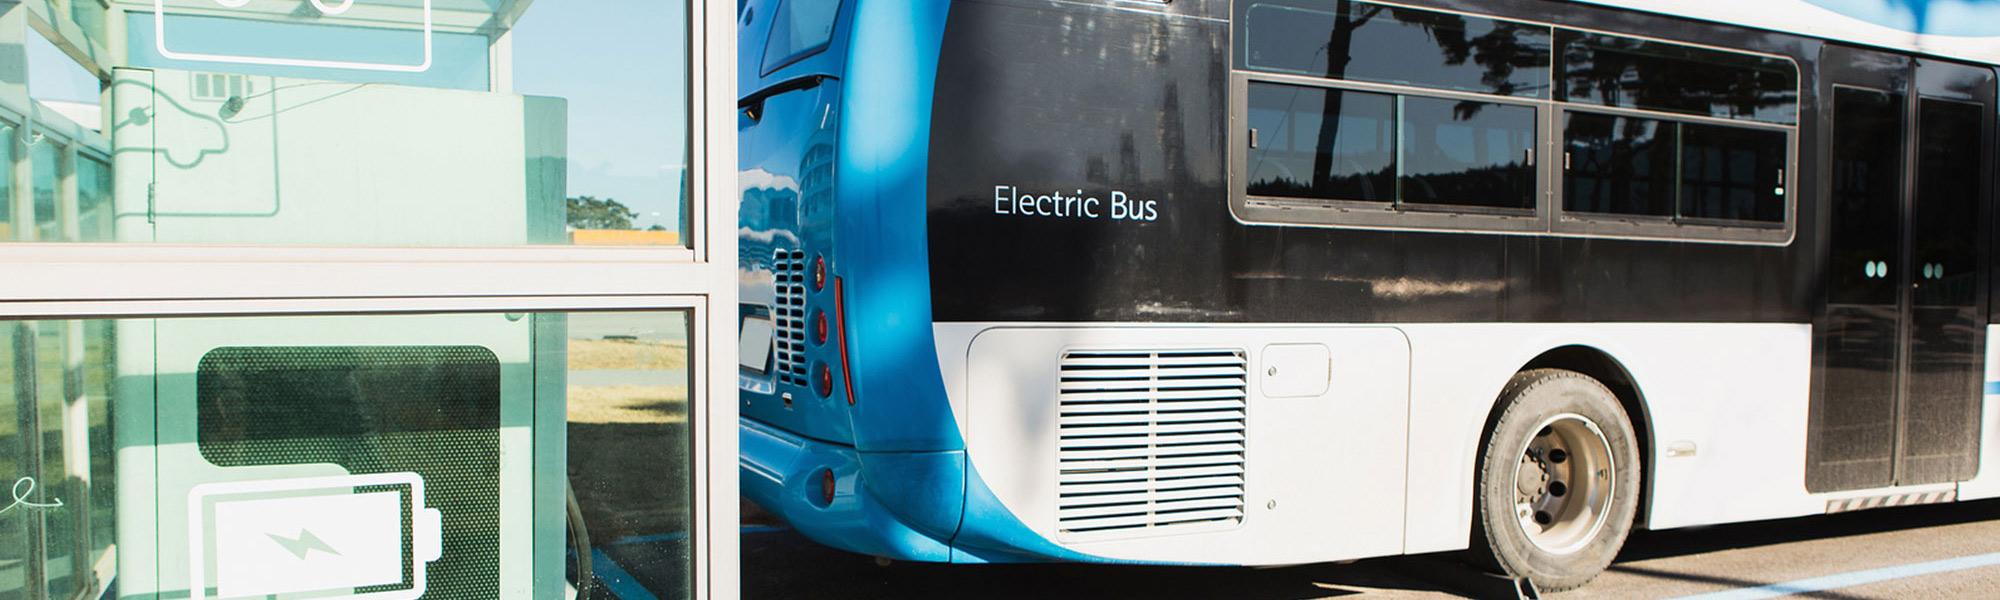 Electric Buses and Trucks